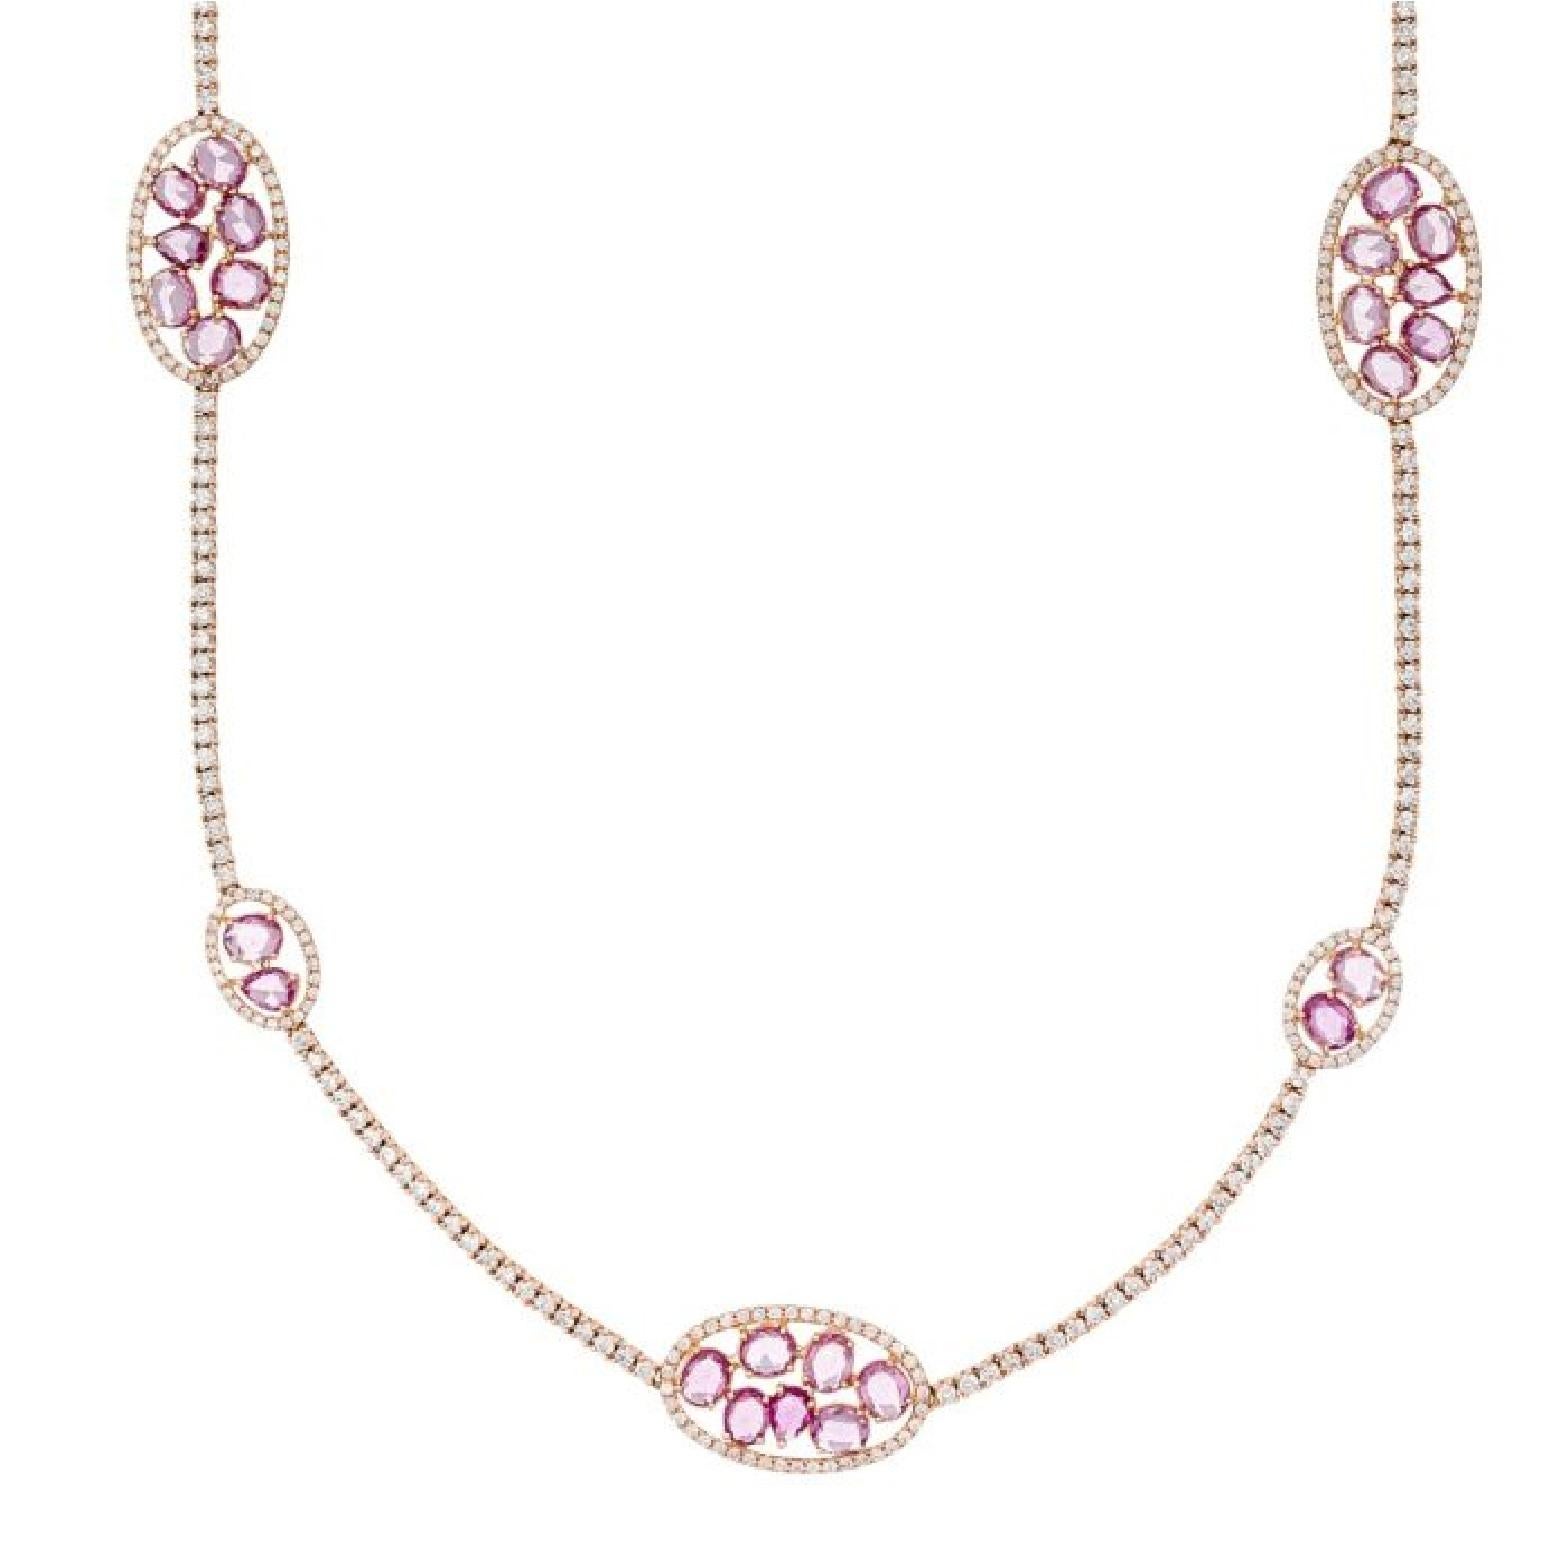 Diana M Jewels 15.00 Carat Pink Sapphire and Diamond Riviera Necklace For Sale 1